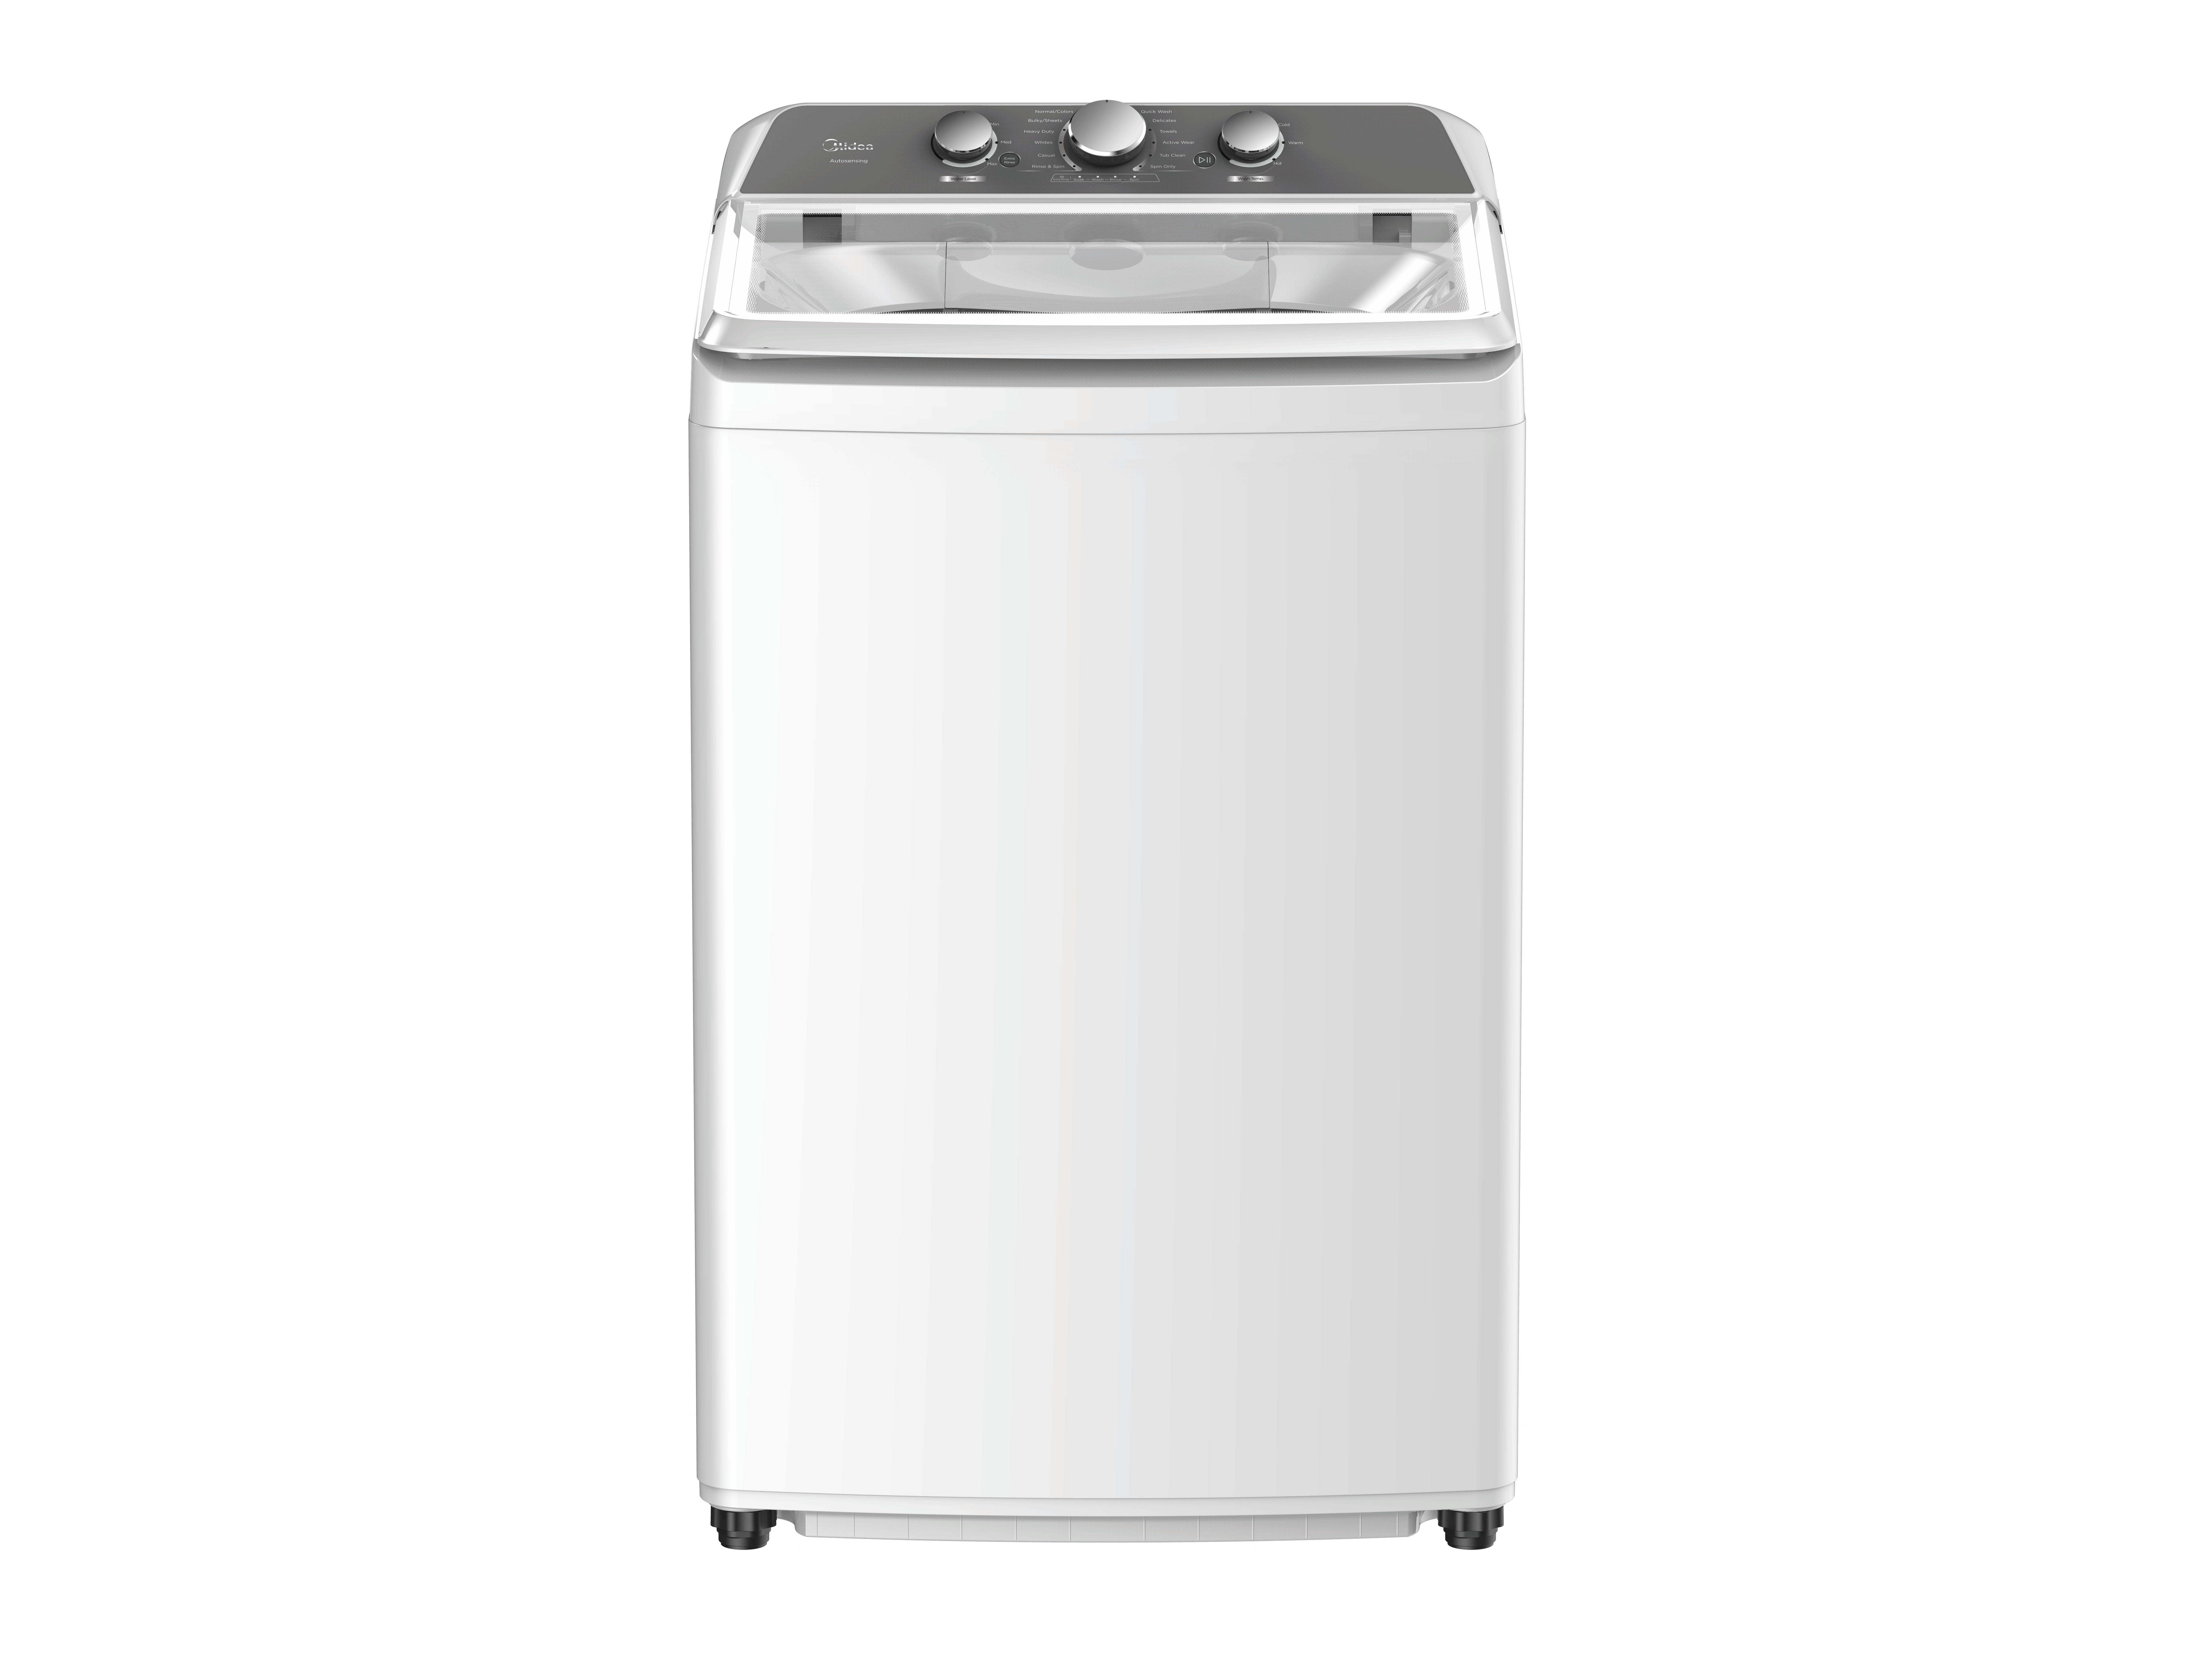 4.3 Cu. Ft. Top Load Washer